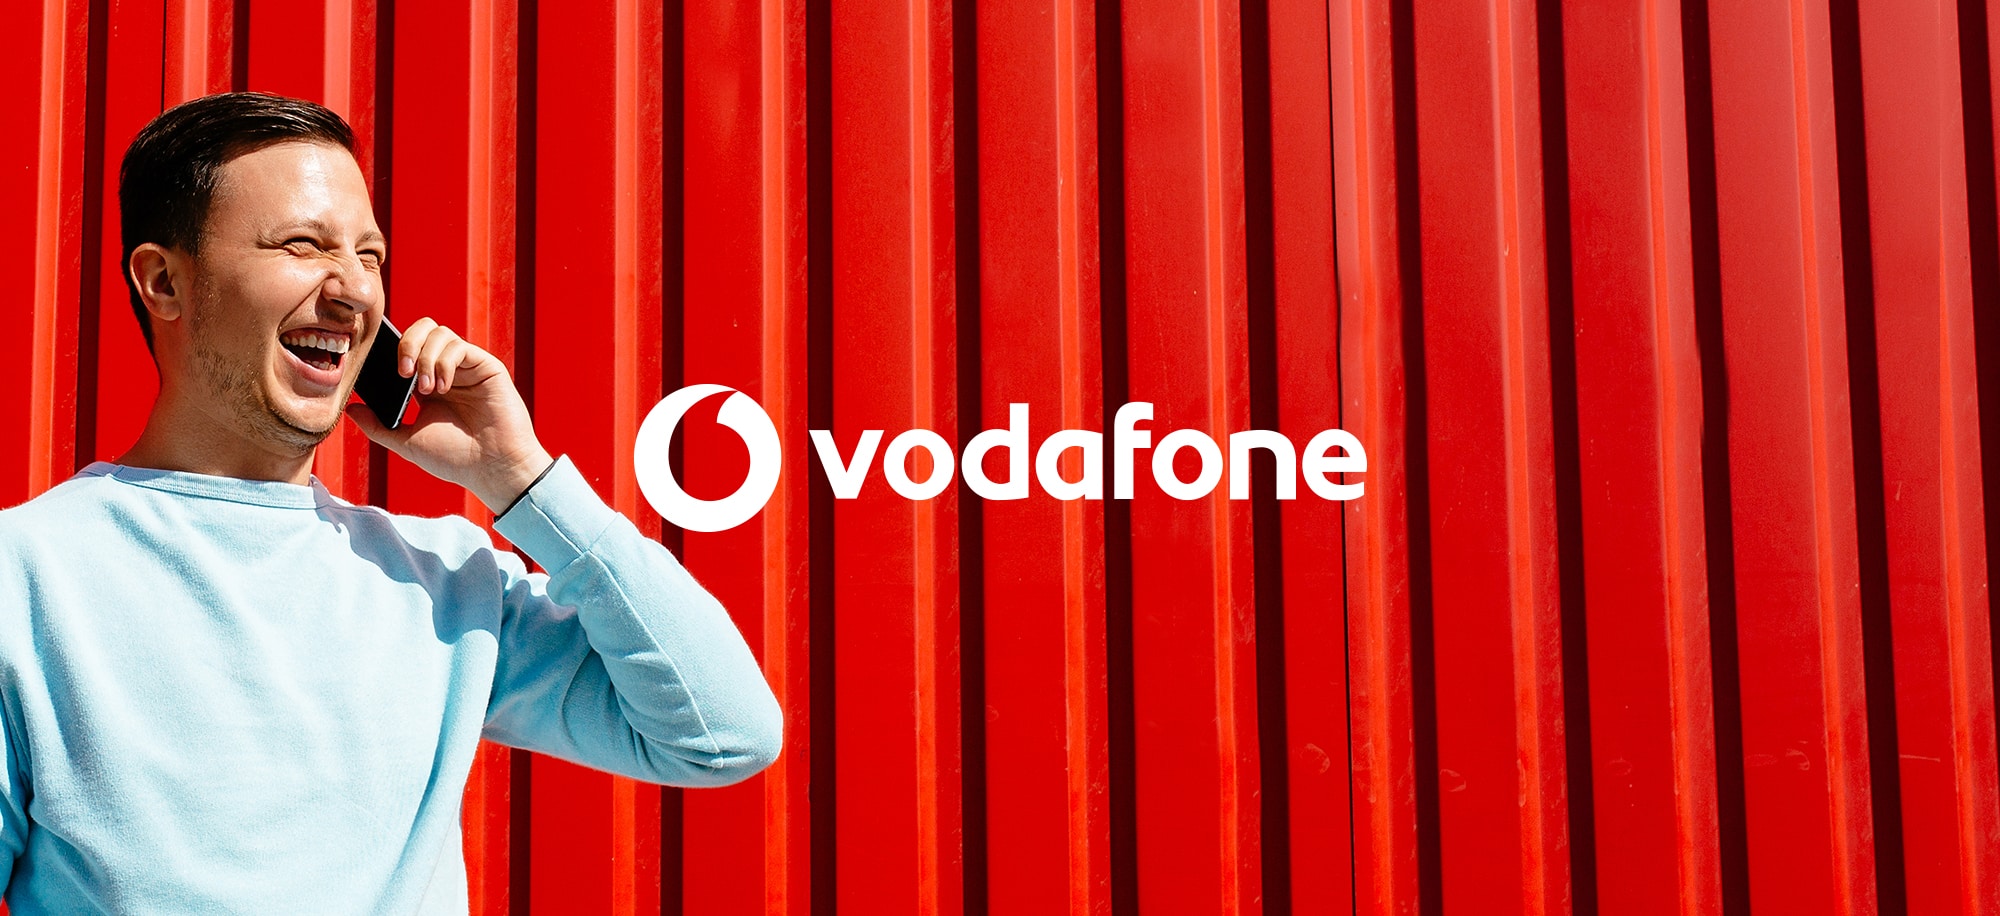 Vodafone recreates water cooler moments